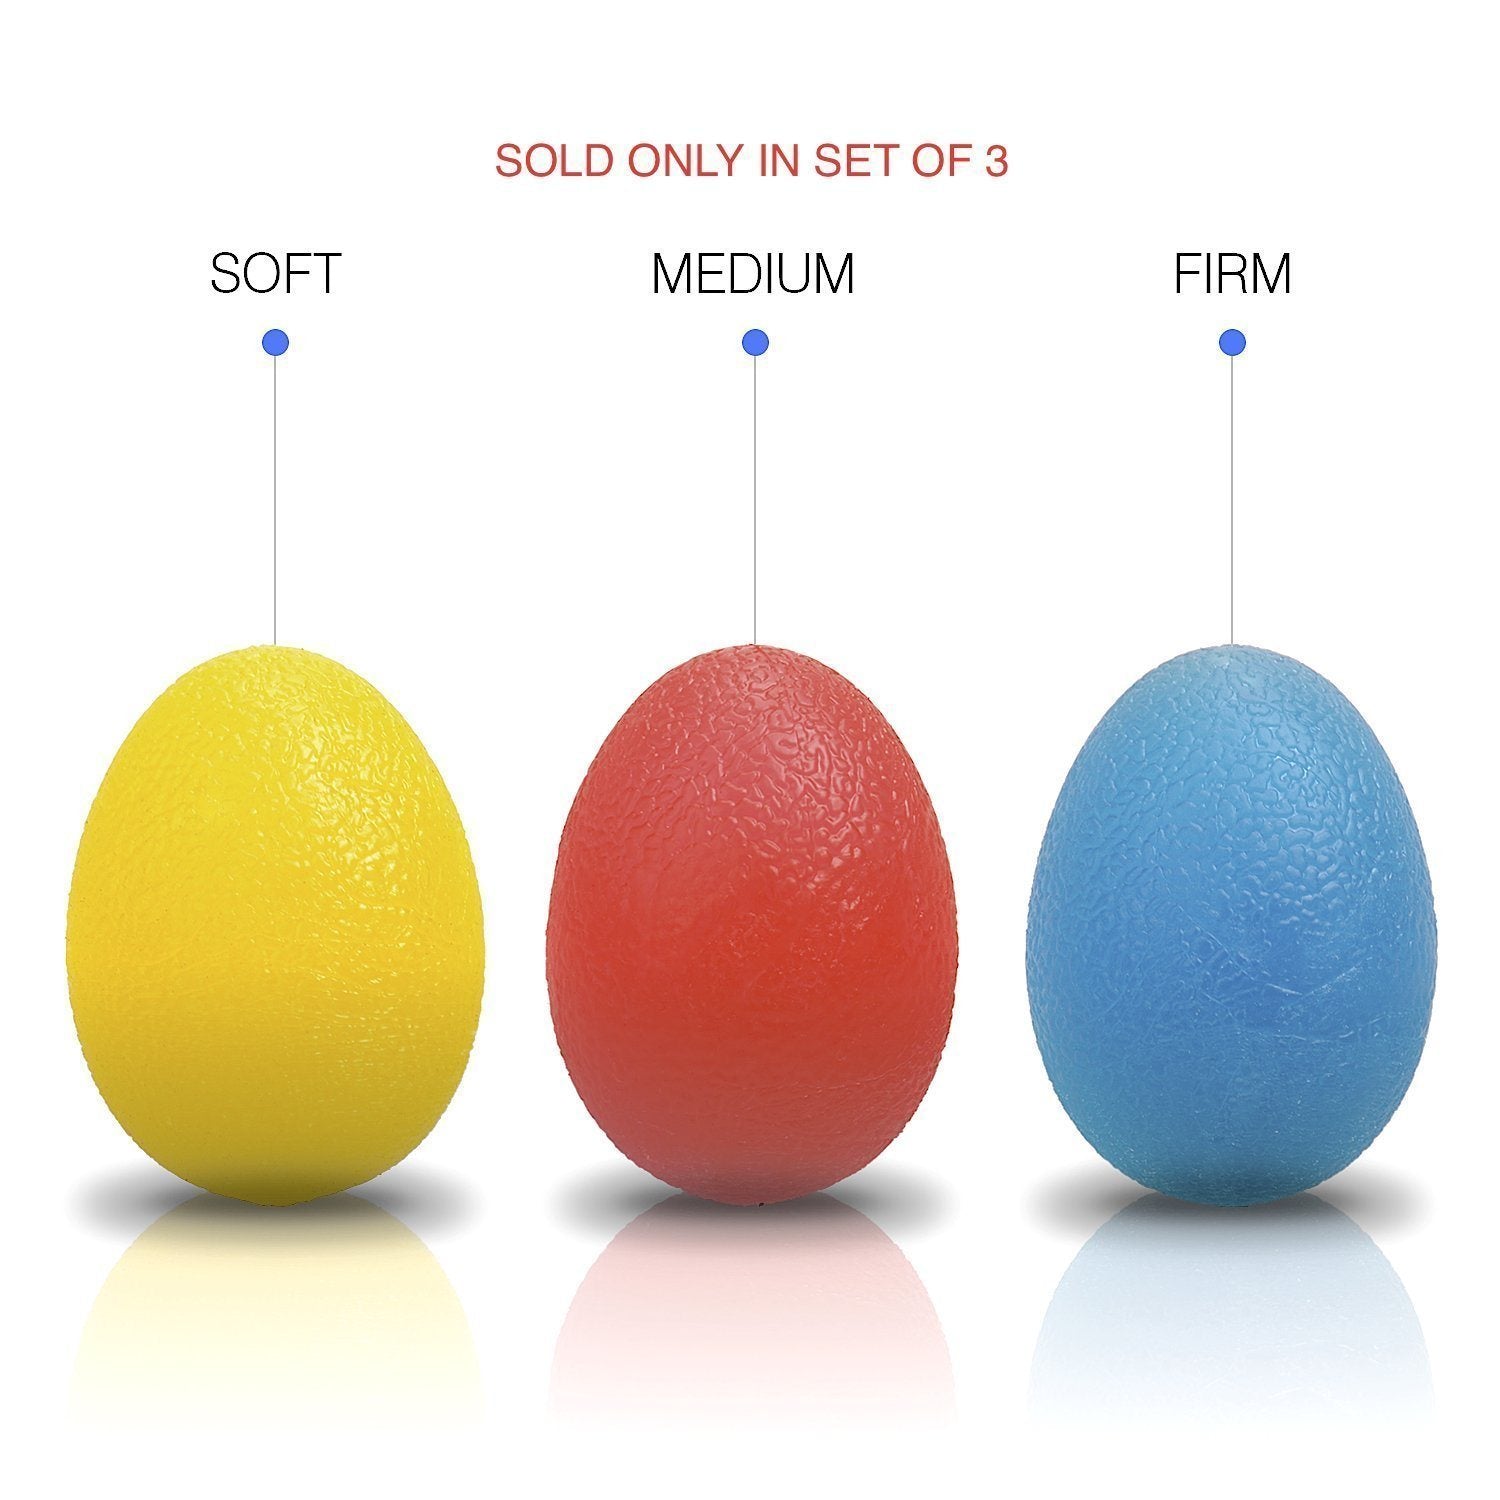 Set of 3 Egg Gripper Finger Resistance Exercise Squeezer Hand Therapy Ball Squishy Hand Grip Strength Trainer Stress Ball for Adults and Kids - WoodPoly.com